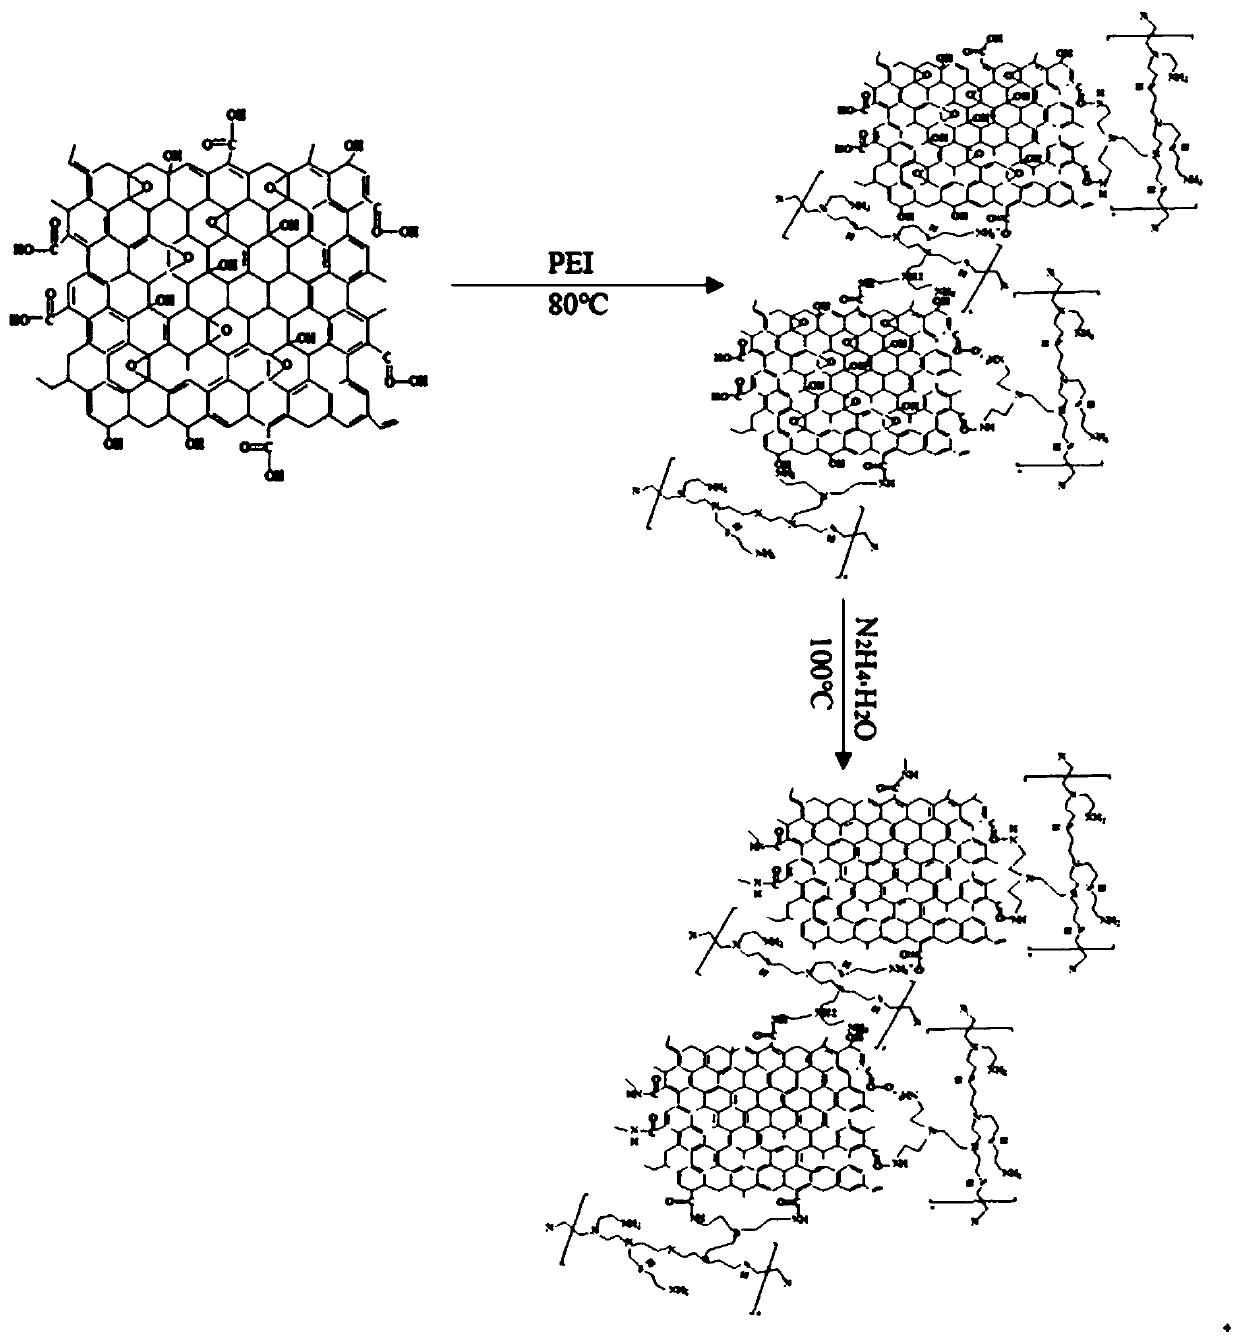 Preparing methods for modified graphene and modified graphene slurry